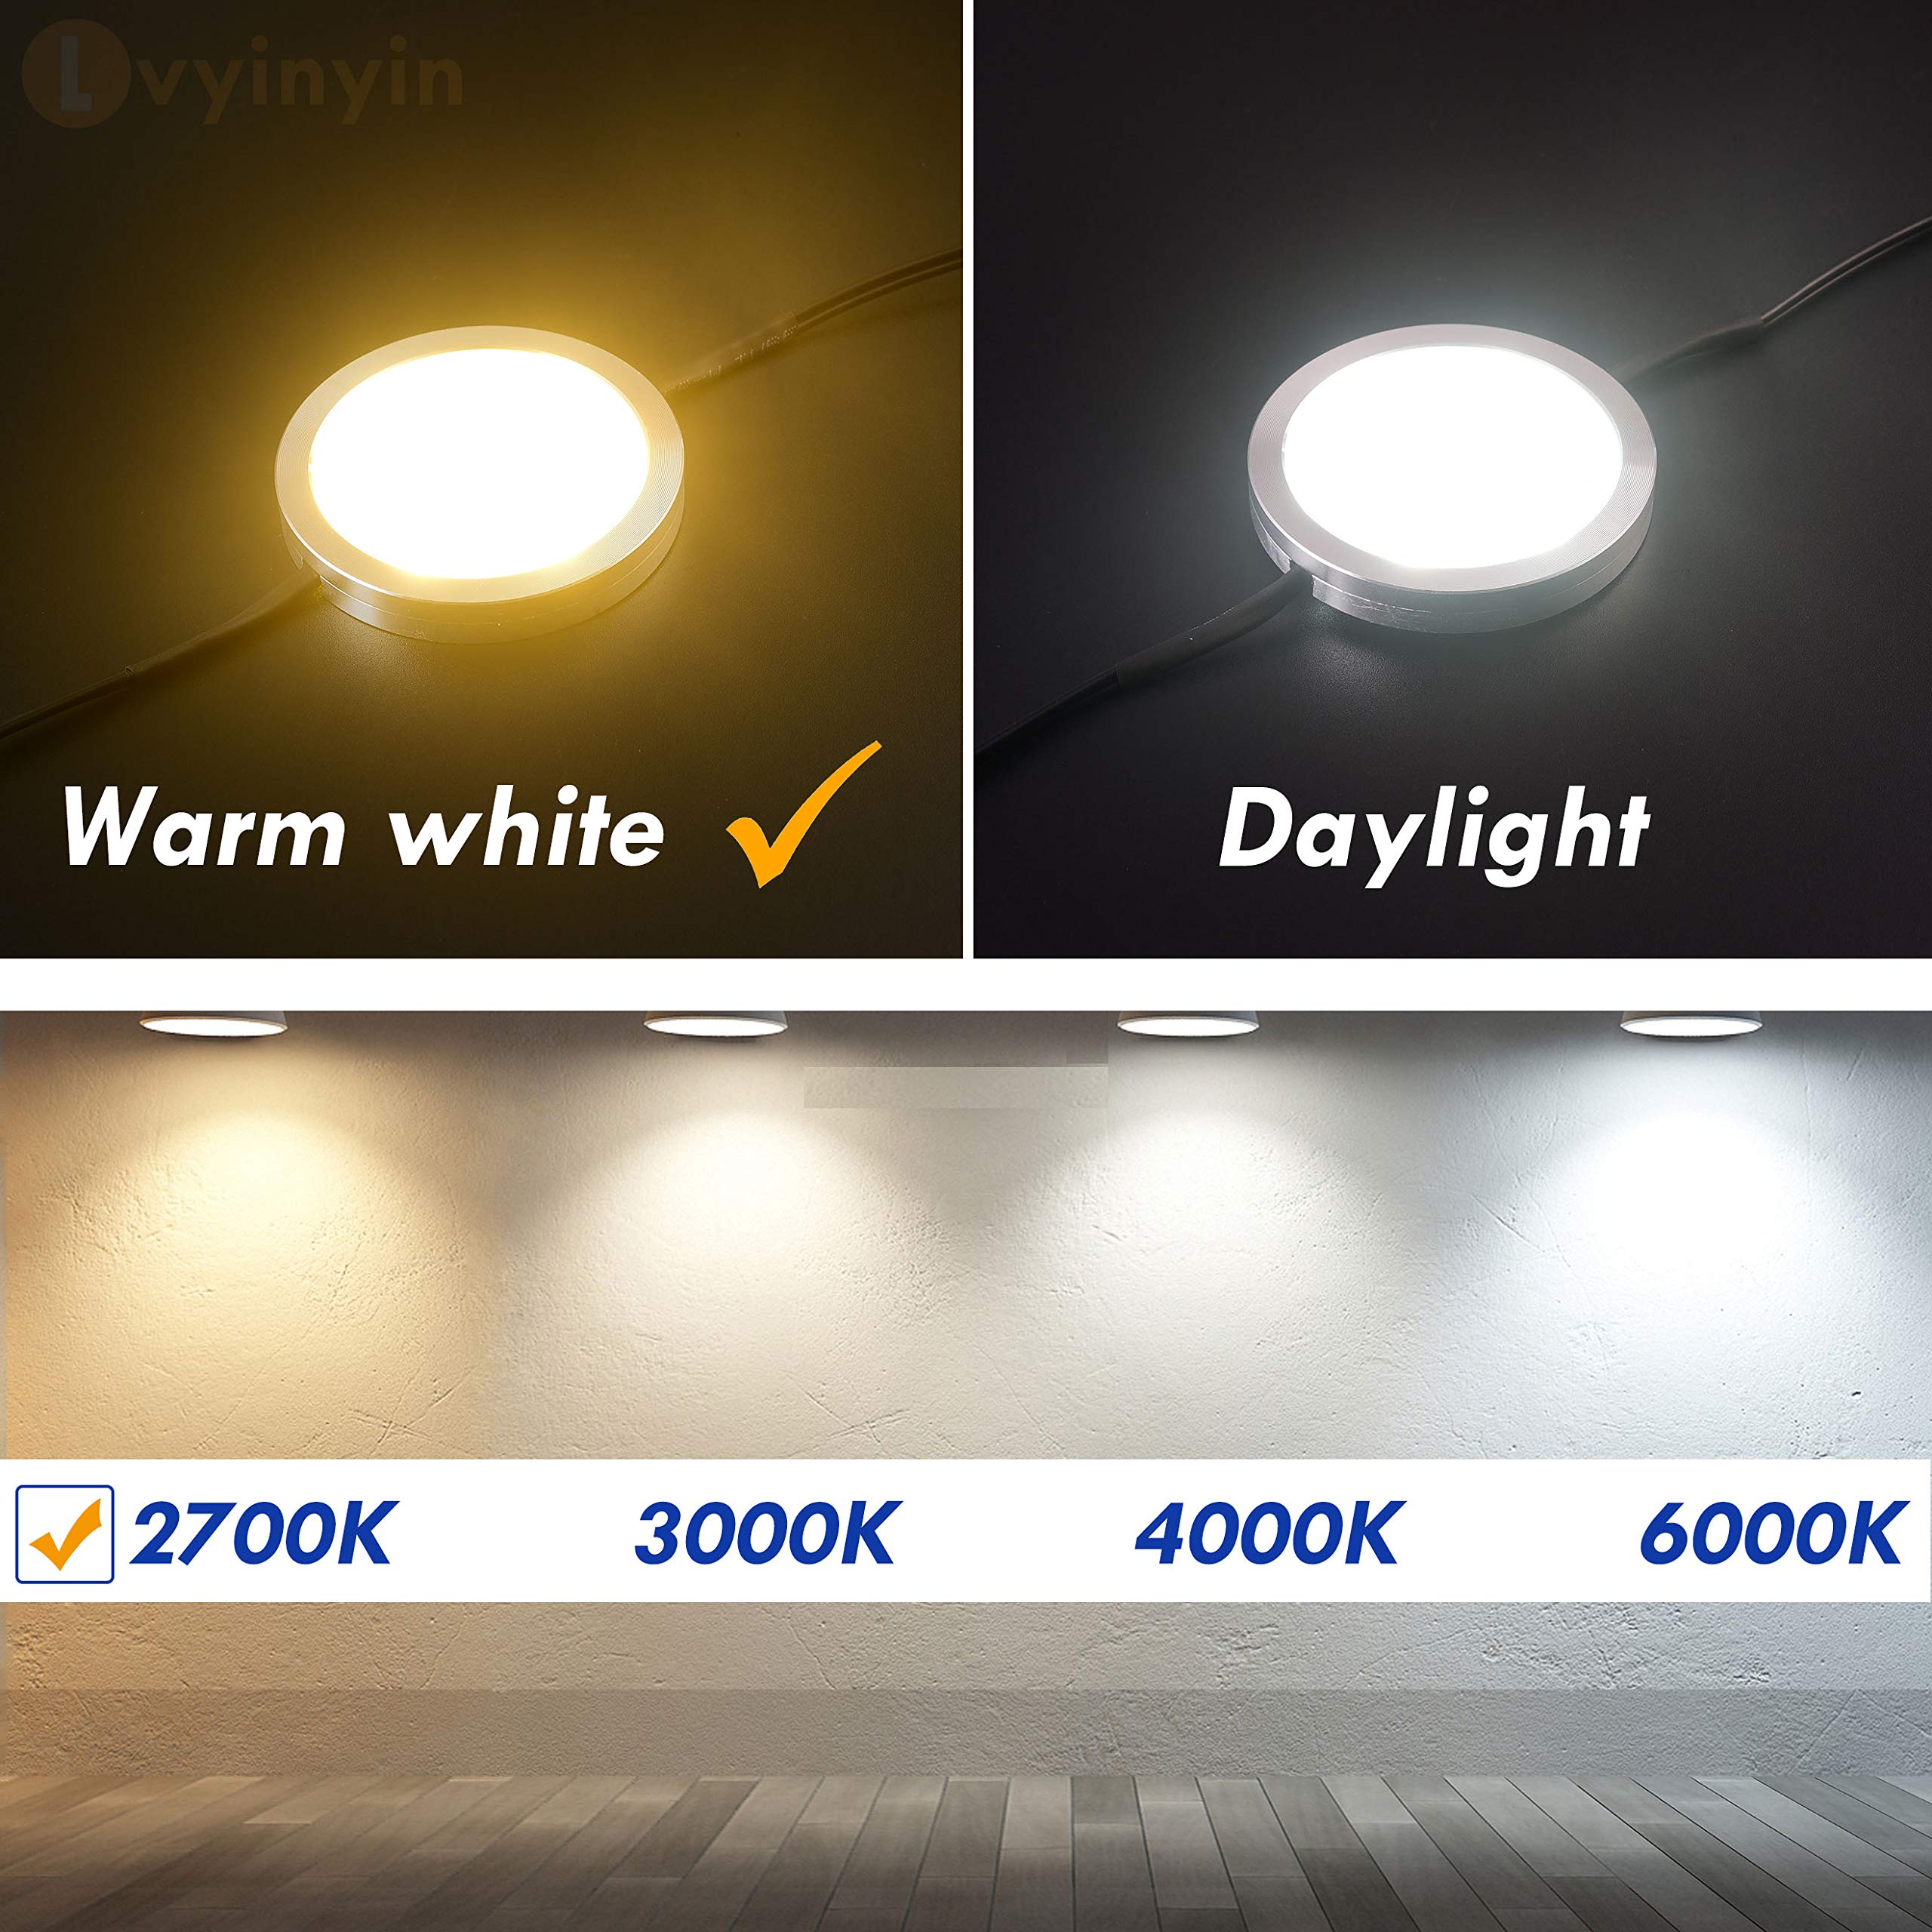 Lvyinyin LED Closet Lighting, Round Under Cabinet Puck Lights, Daisy Chained, 110 Volt Plug-in, RF Dimmable Remote Control, Y Splitter, Extension Cables, Black Wires, Warm White 2700K, 6 Lights